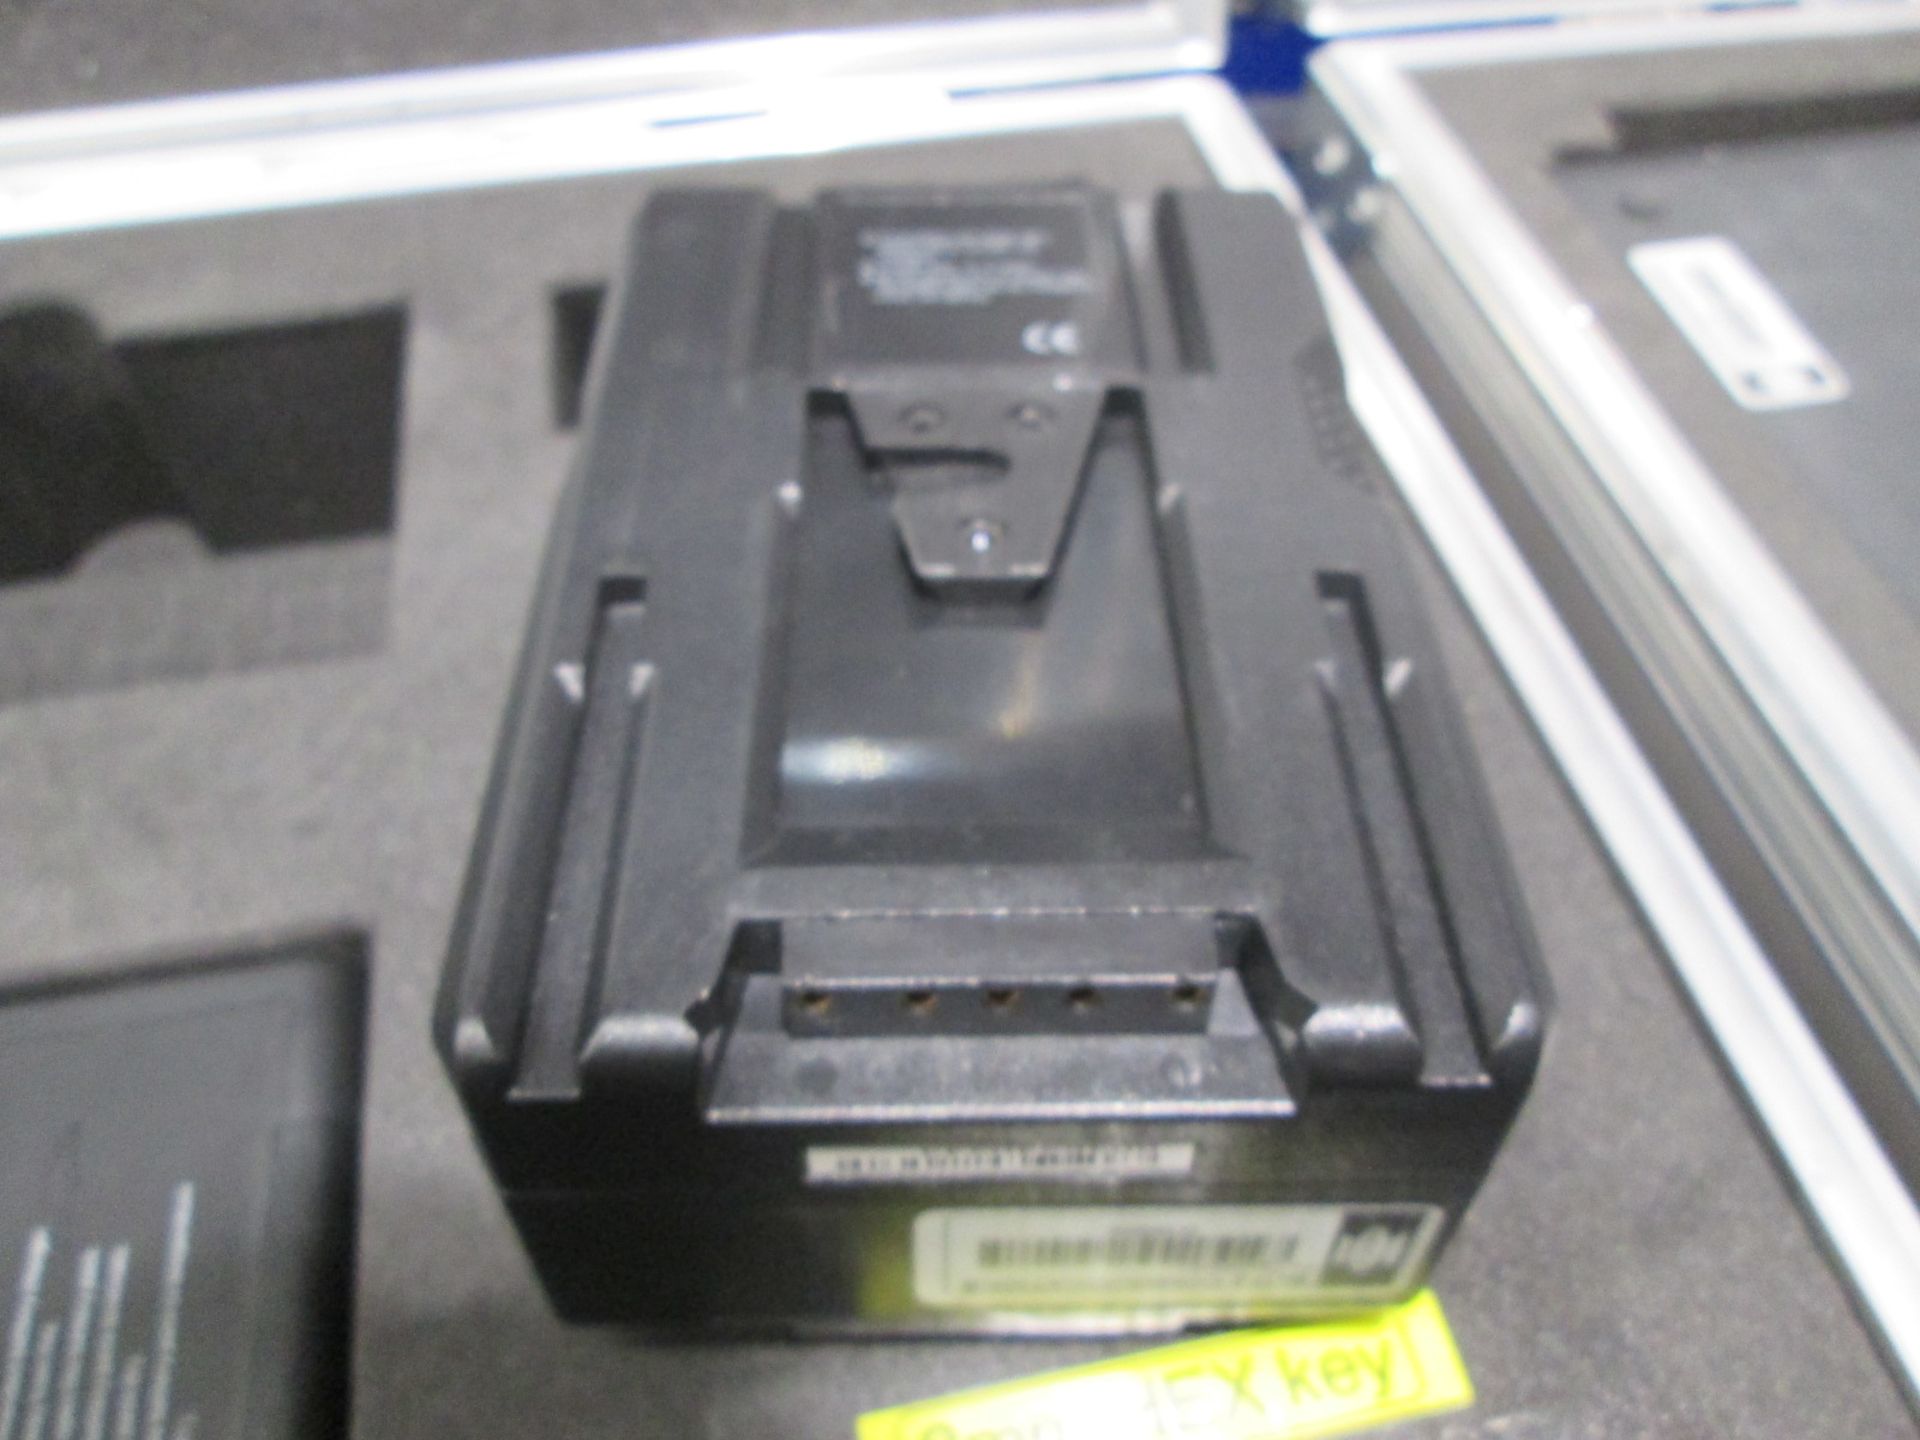 Pro-X GP Camera Battery Kits (Qty 3) To include 2 x batteries, 1 x charger, 1 x rail mount, 1 x - Image 3 of 9